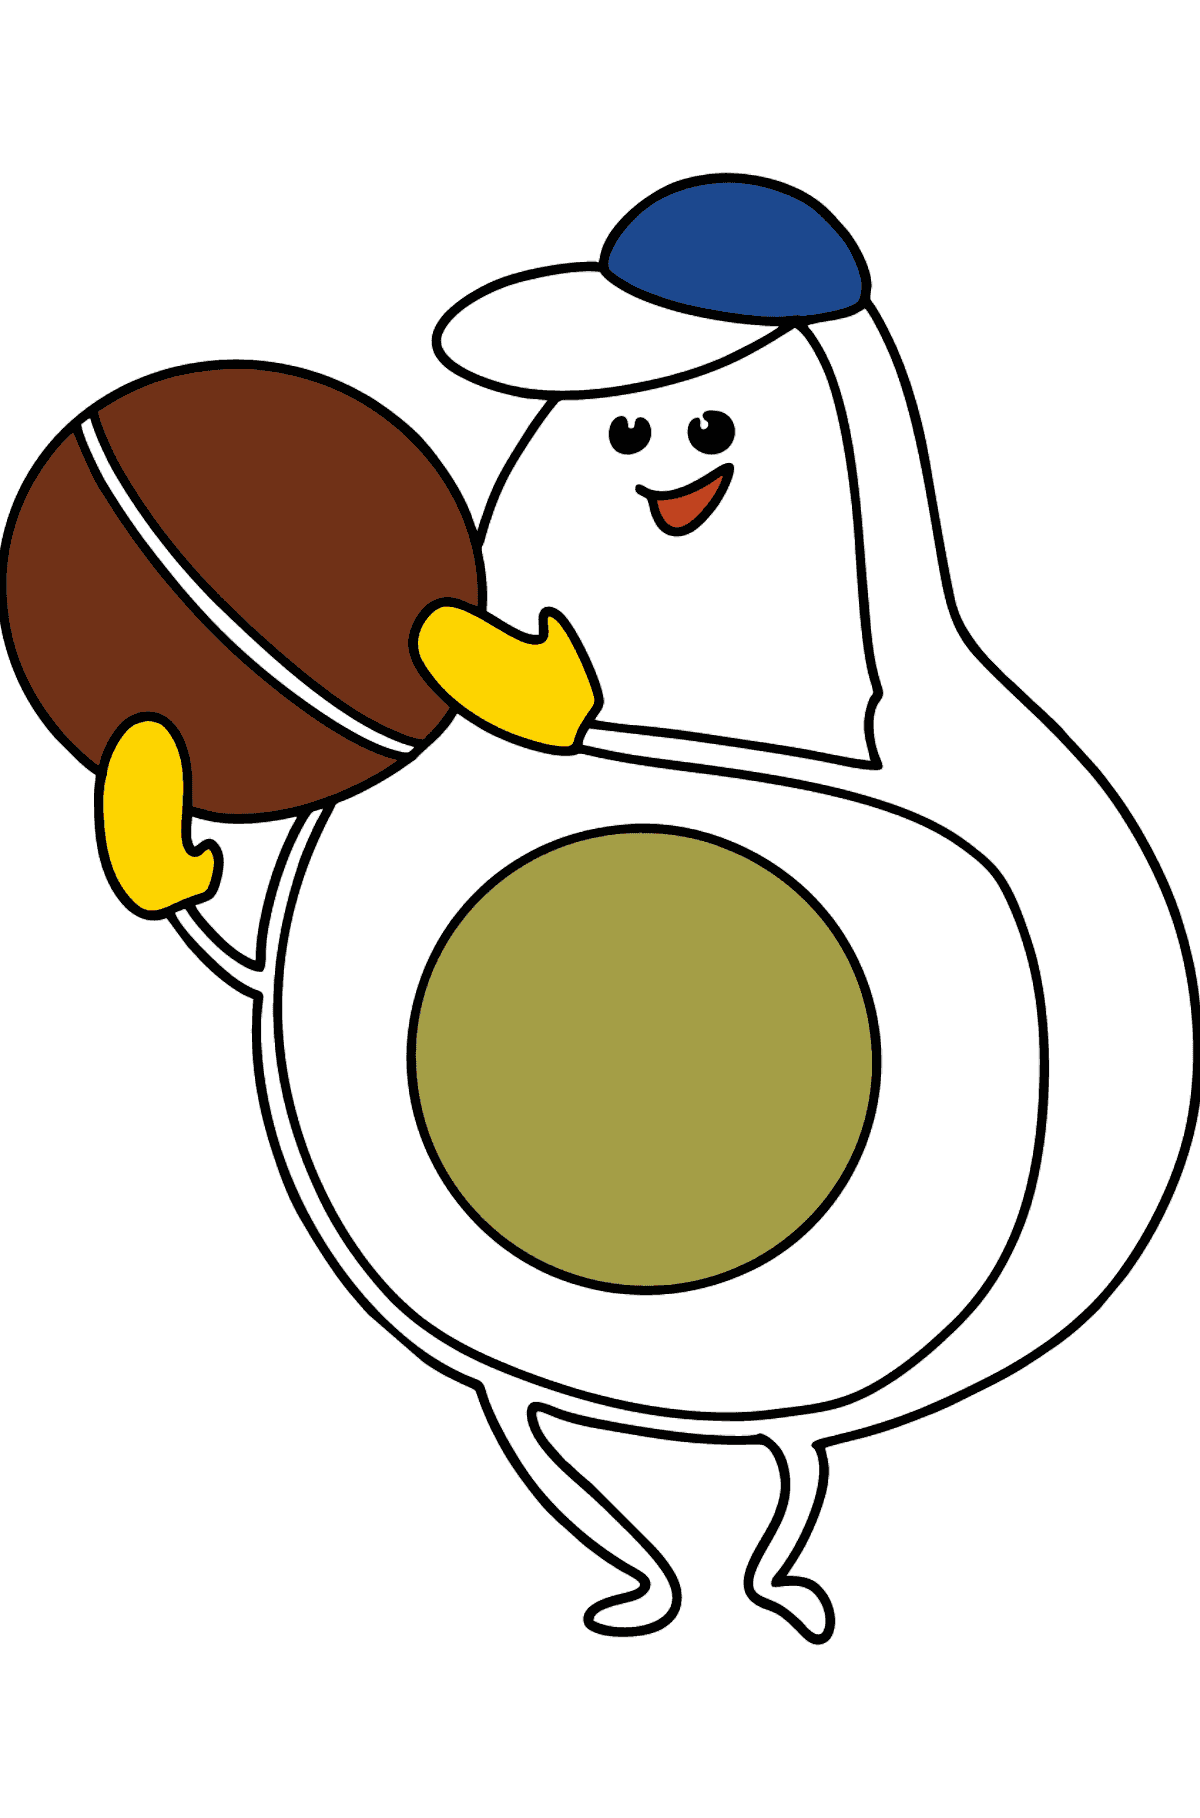 Avocado Plays Football coloring page - Coloring Pages for Kids